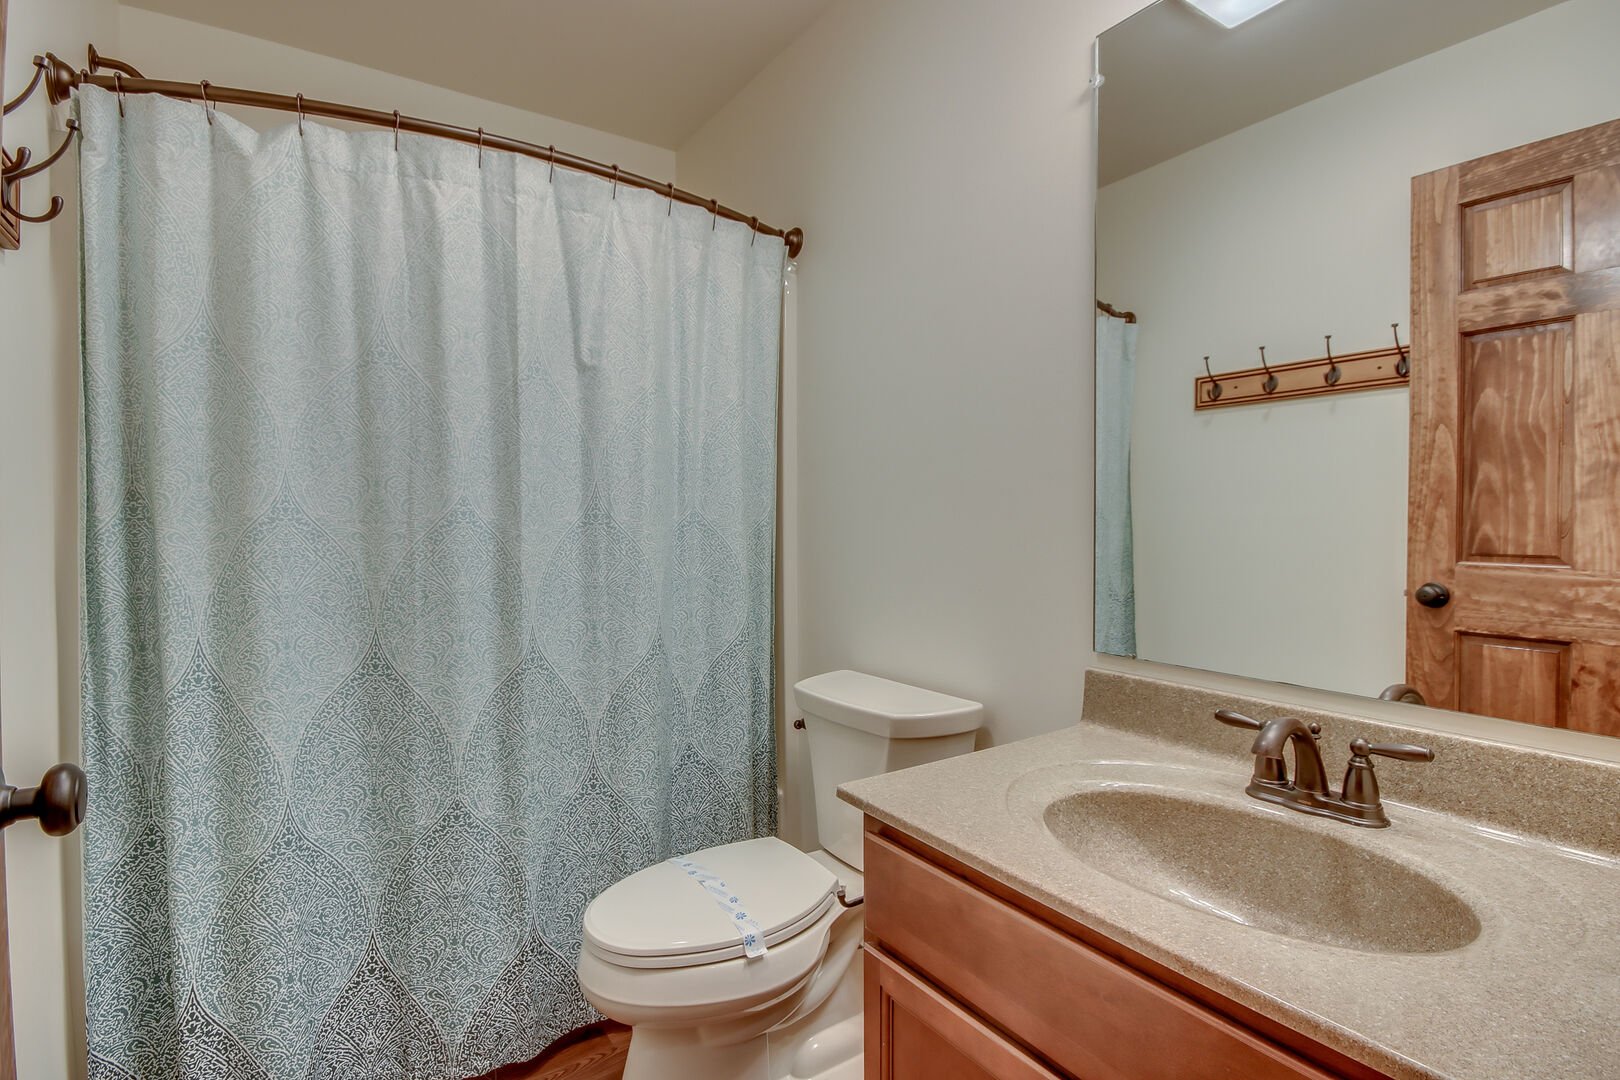 One of the Bathrooms in our Poconos Vacation Home Rental